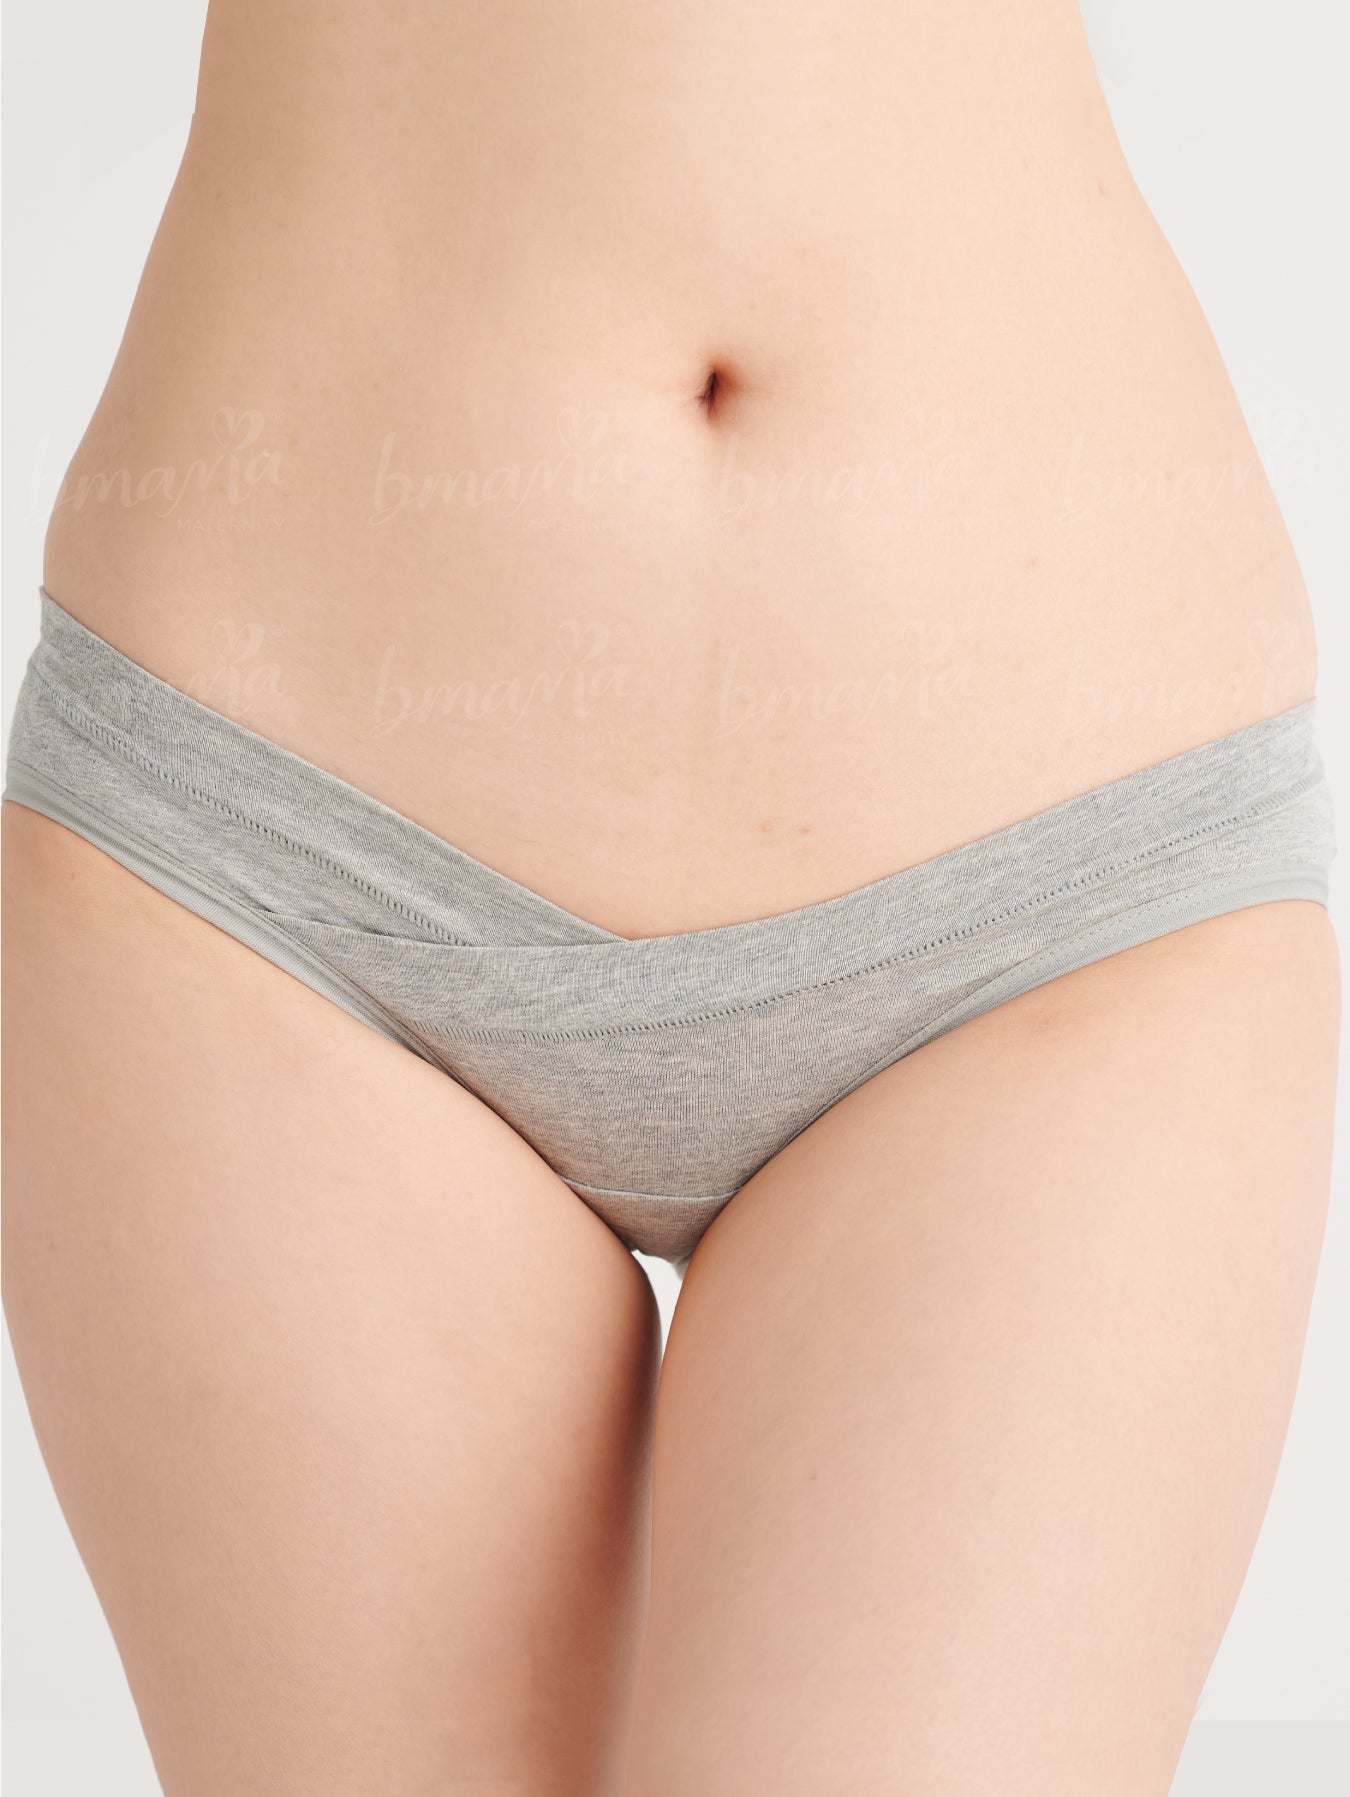 Sunway eMall, Your Favourite Mall is now online, Maternity, Soft Cotton  Underwear Postpartum Low Waist Panties Sunway eMall, Your Favourite Mall  is now online